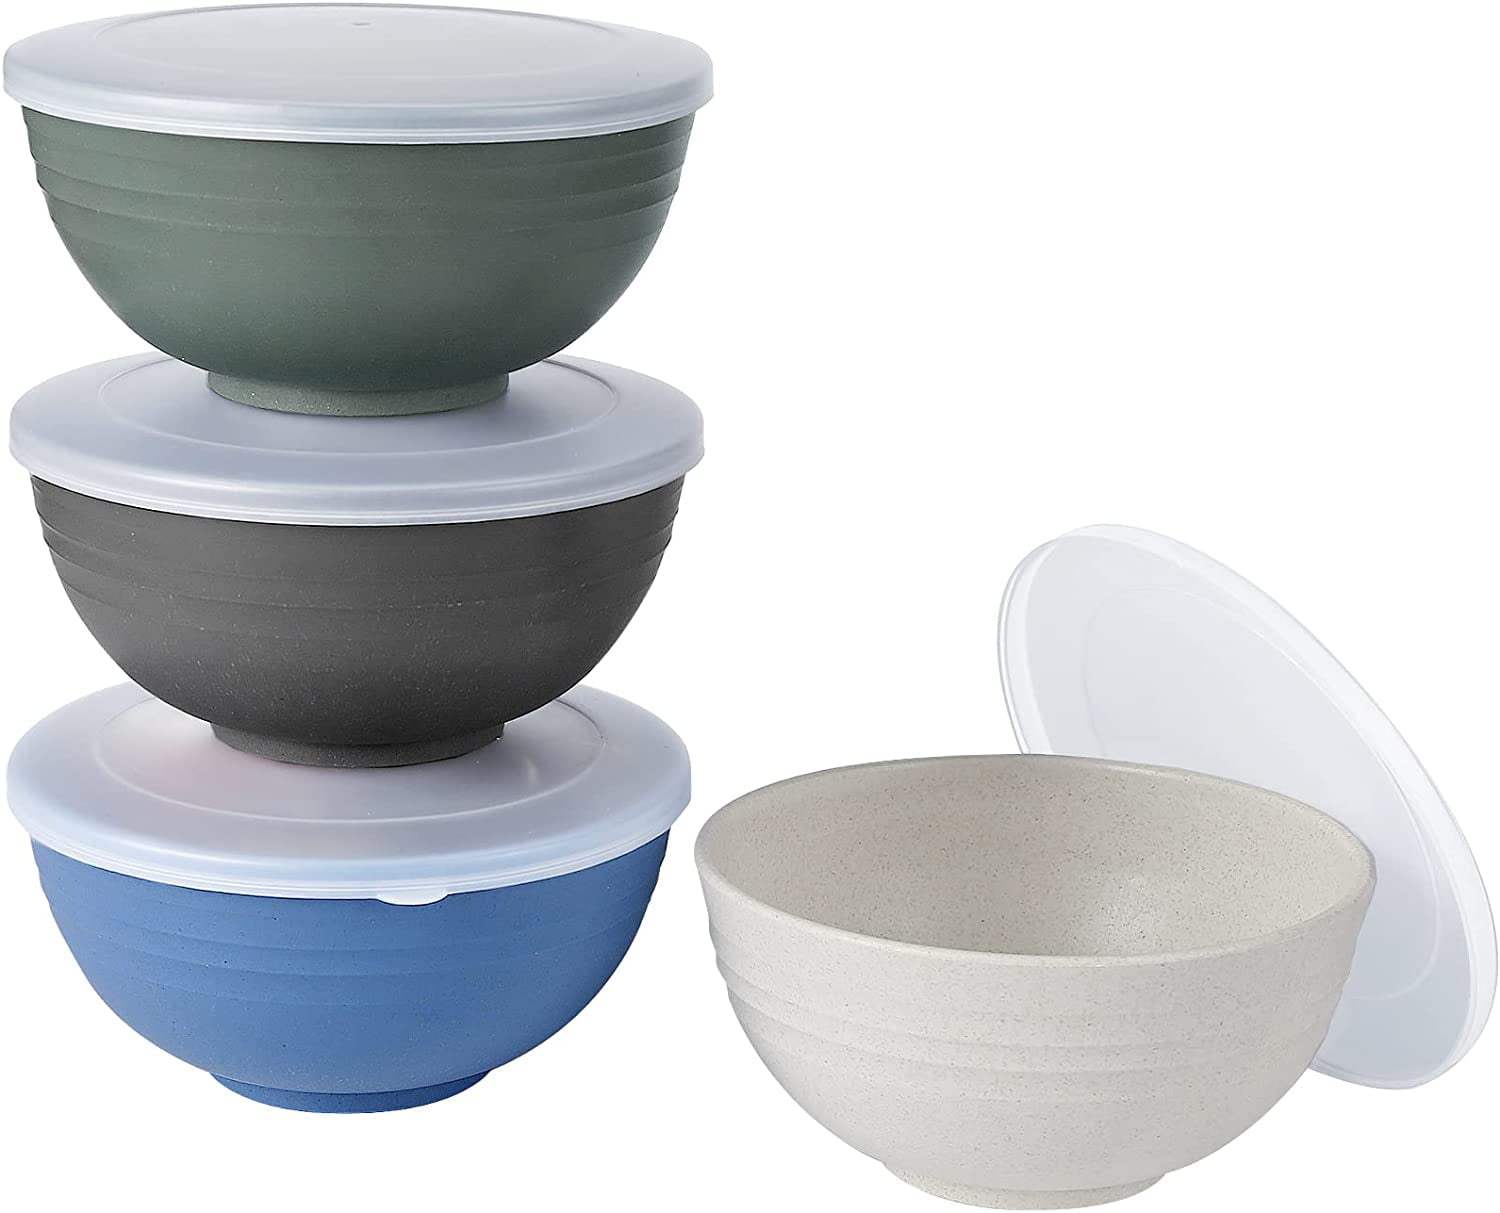 Loobuu Wheat Plastic Cereal Bowls with Lid, Resuable Bowls for Kitchen, Set of 4, Microwave and Dishwasher Safe, for Soup, Oatmeal, Ramen, RV, Camping